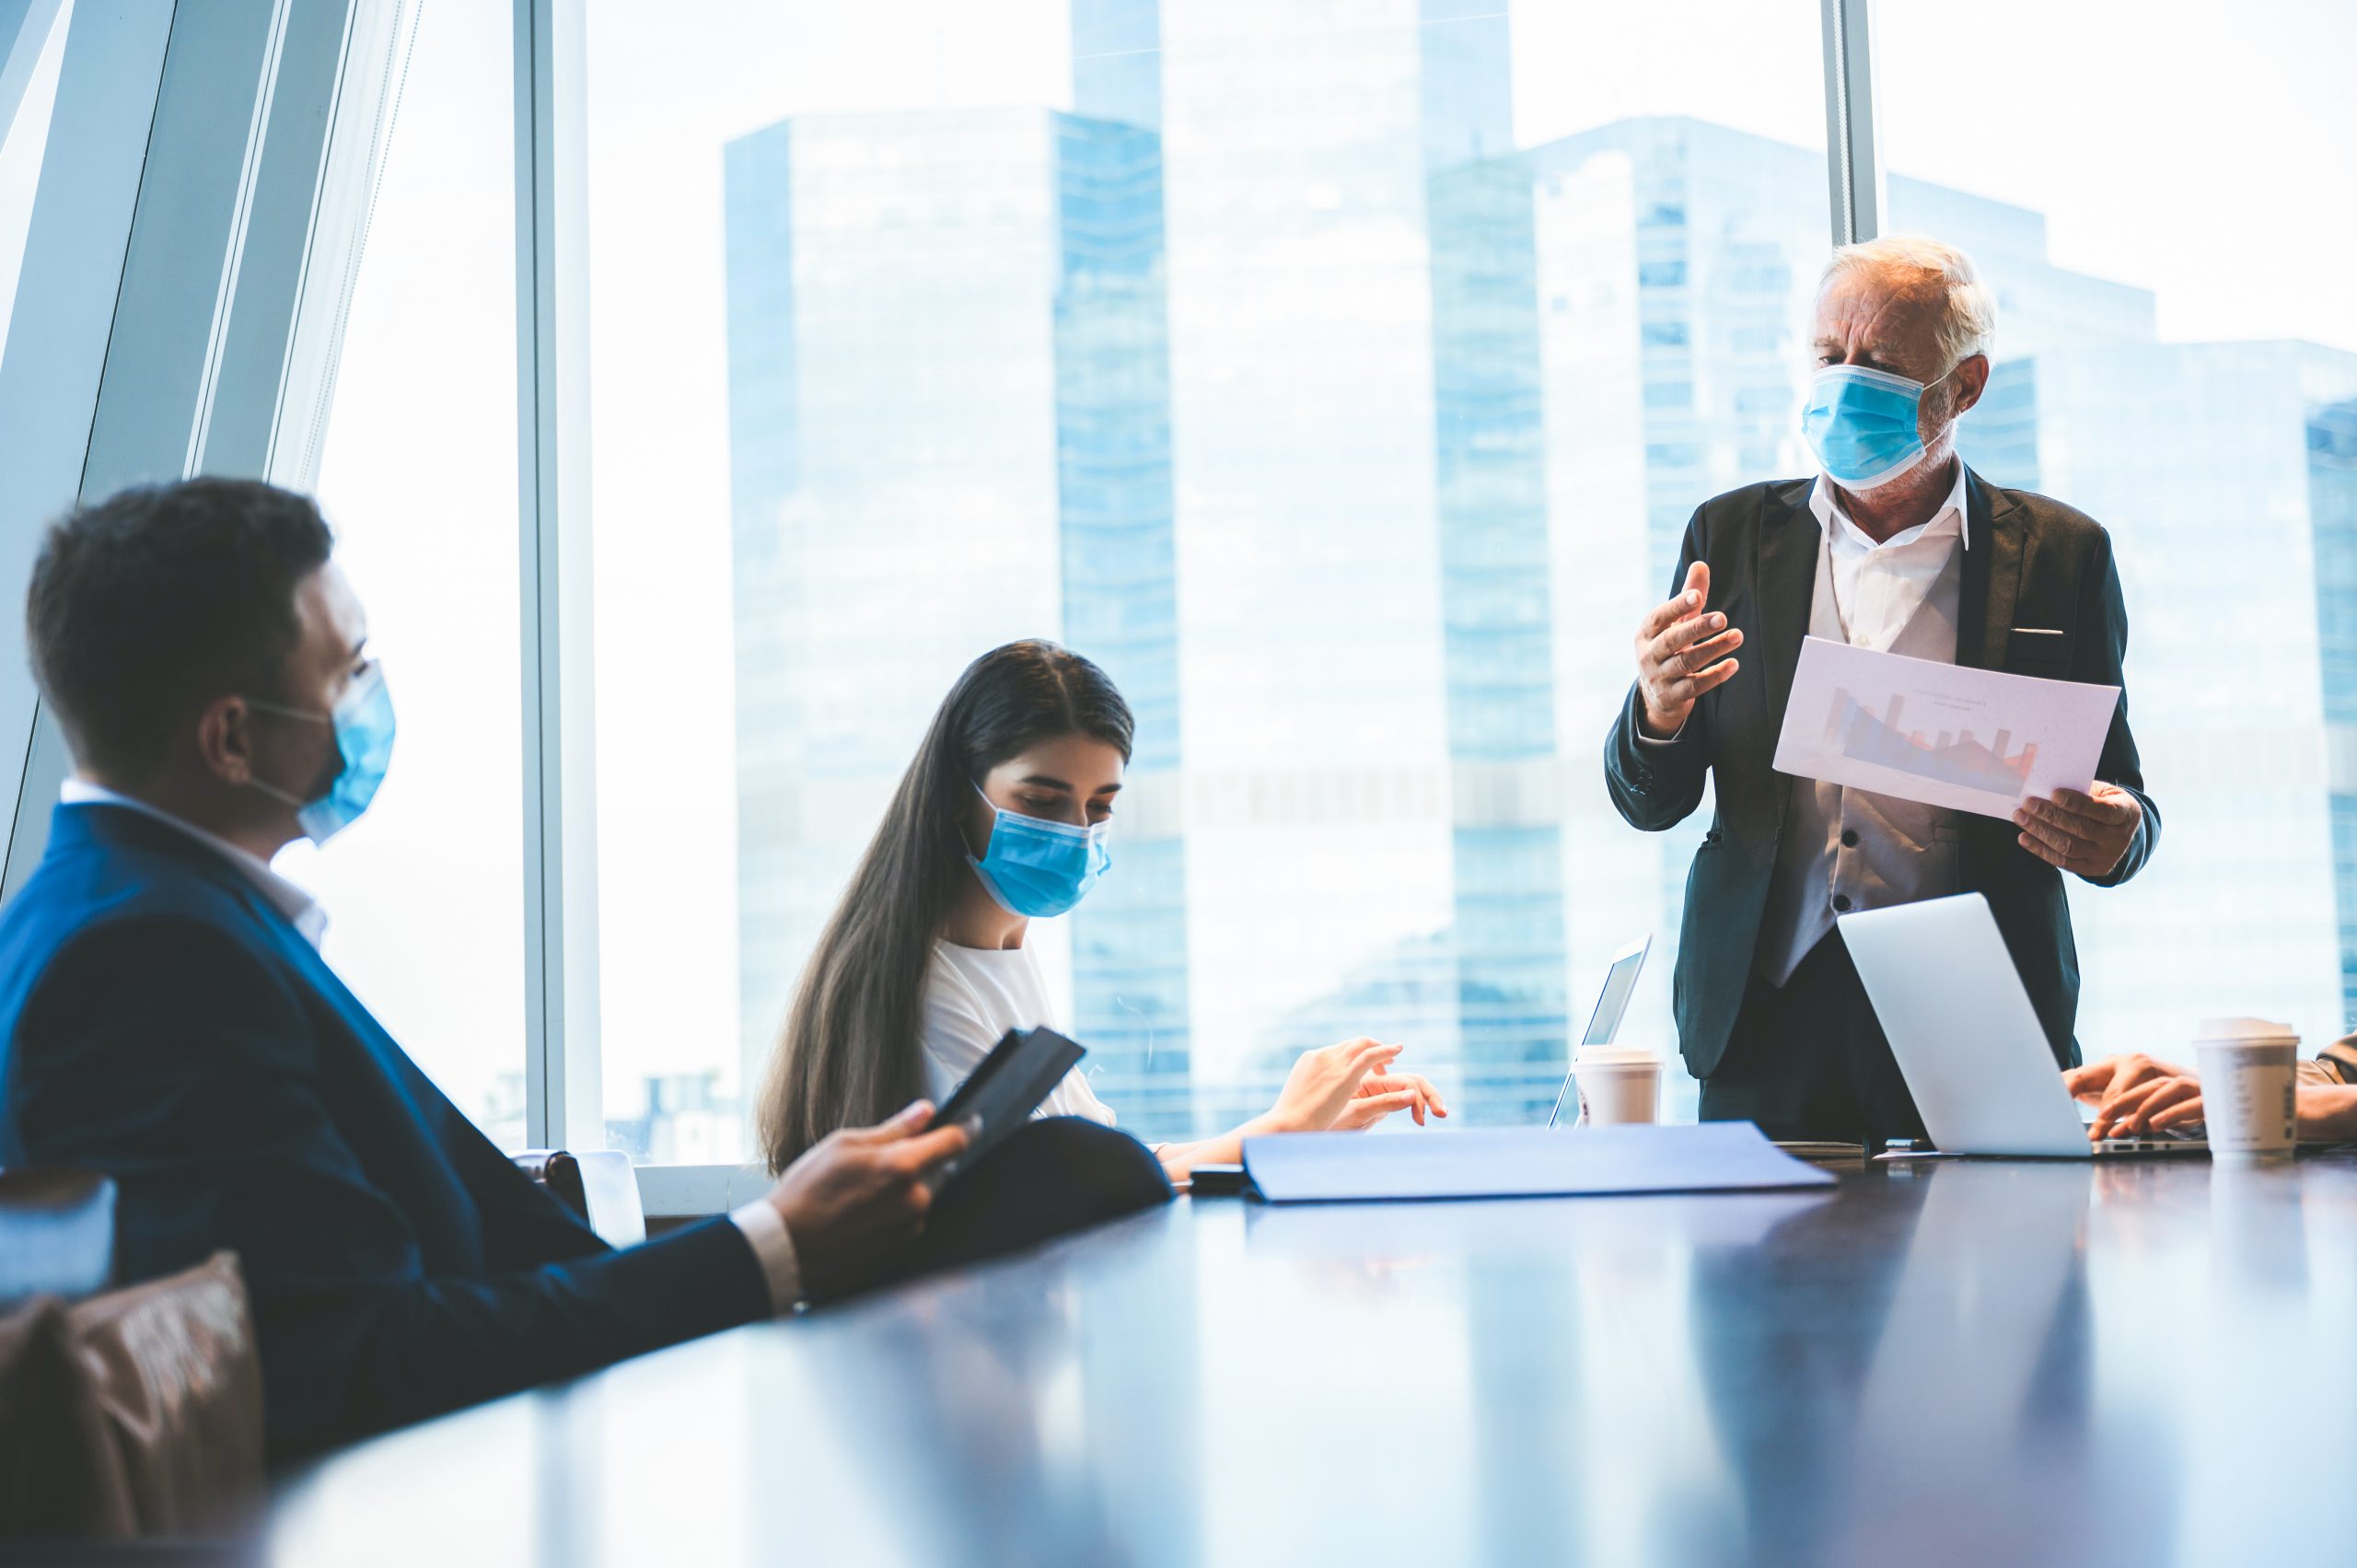 A group of businessmen meeting a work plan in modern office By wearing a surgical mask to prevent the spread of the virus, new normal lifestyle for business work